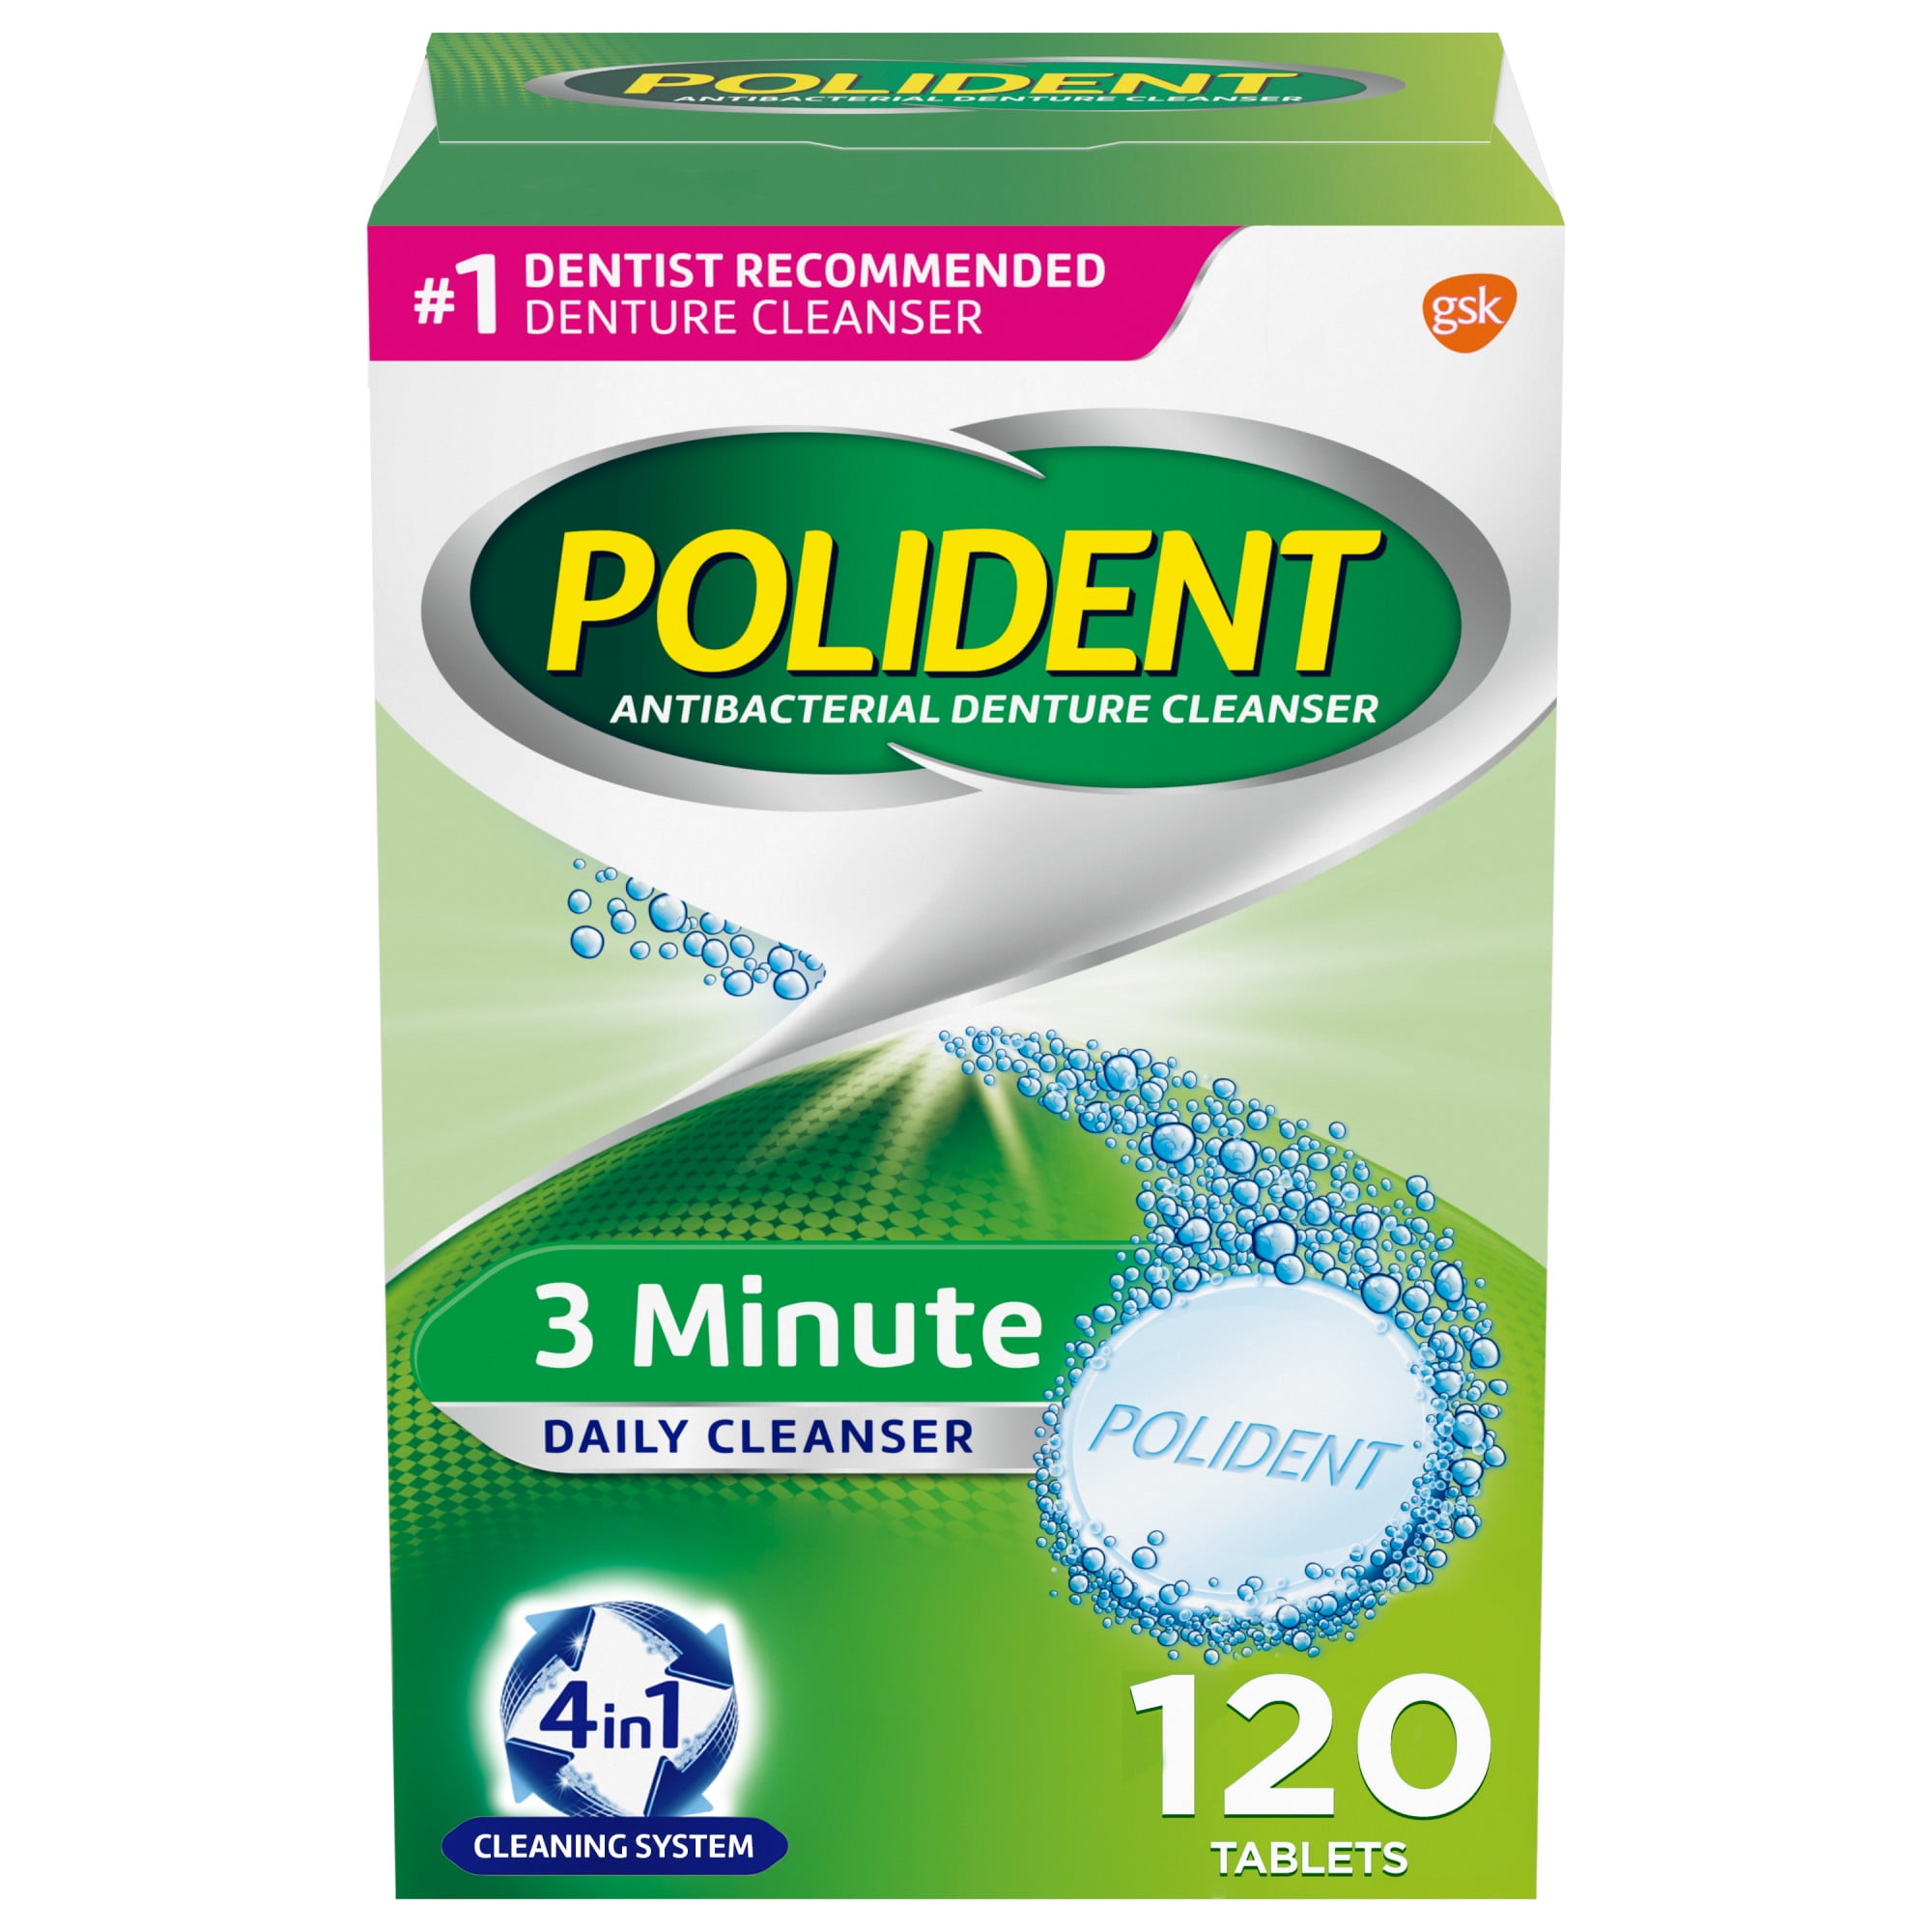 Polident 3 Minute Antibacterial Denture Cleanser Tablets, Triple Mint, 120 Count